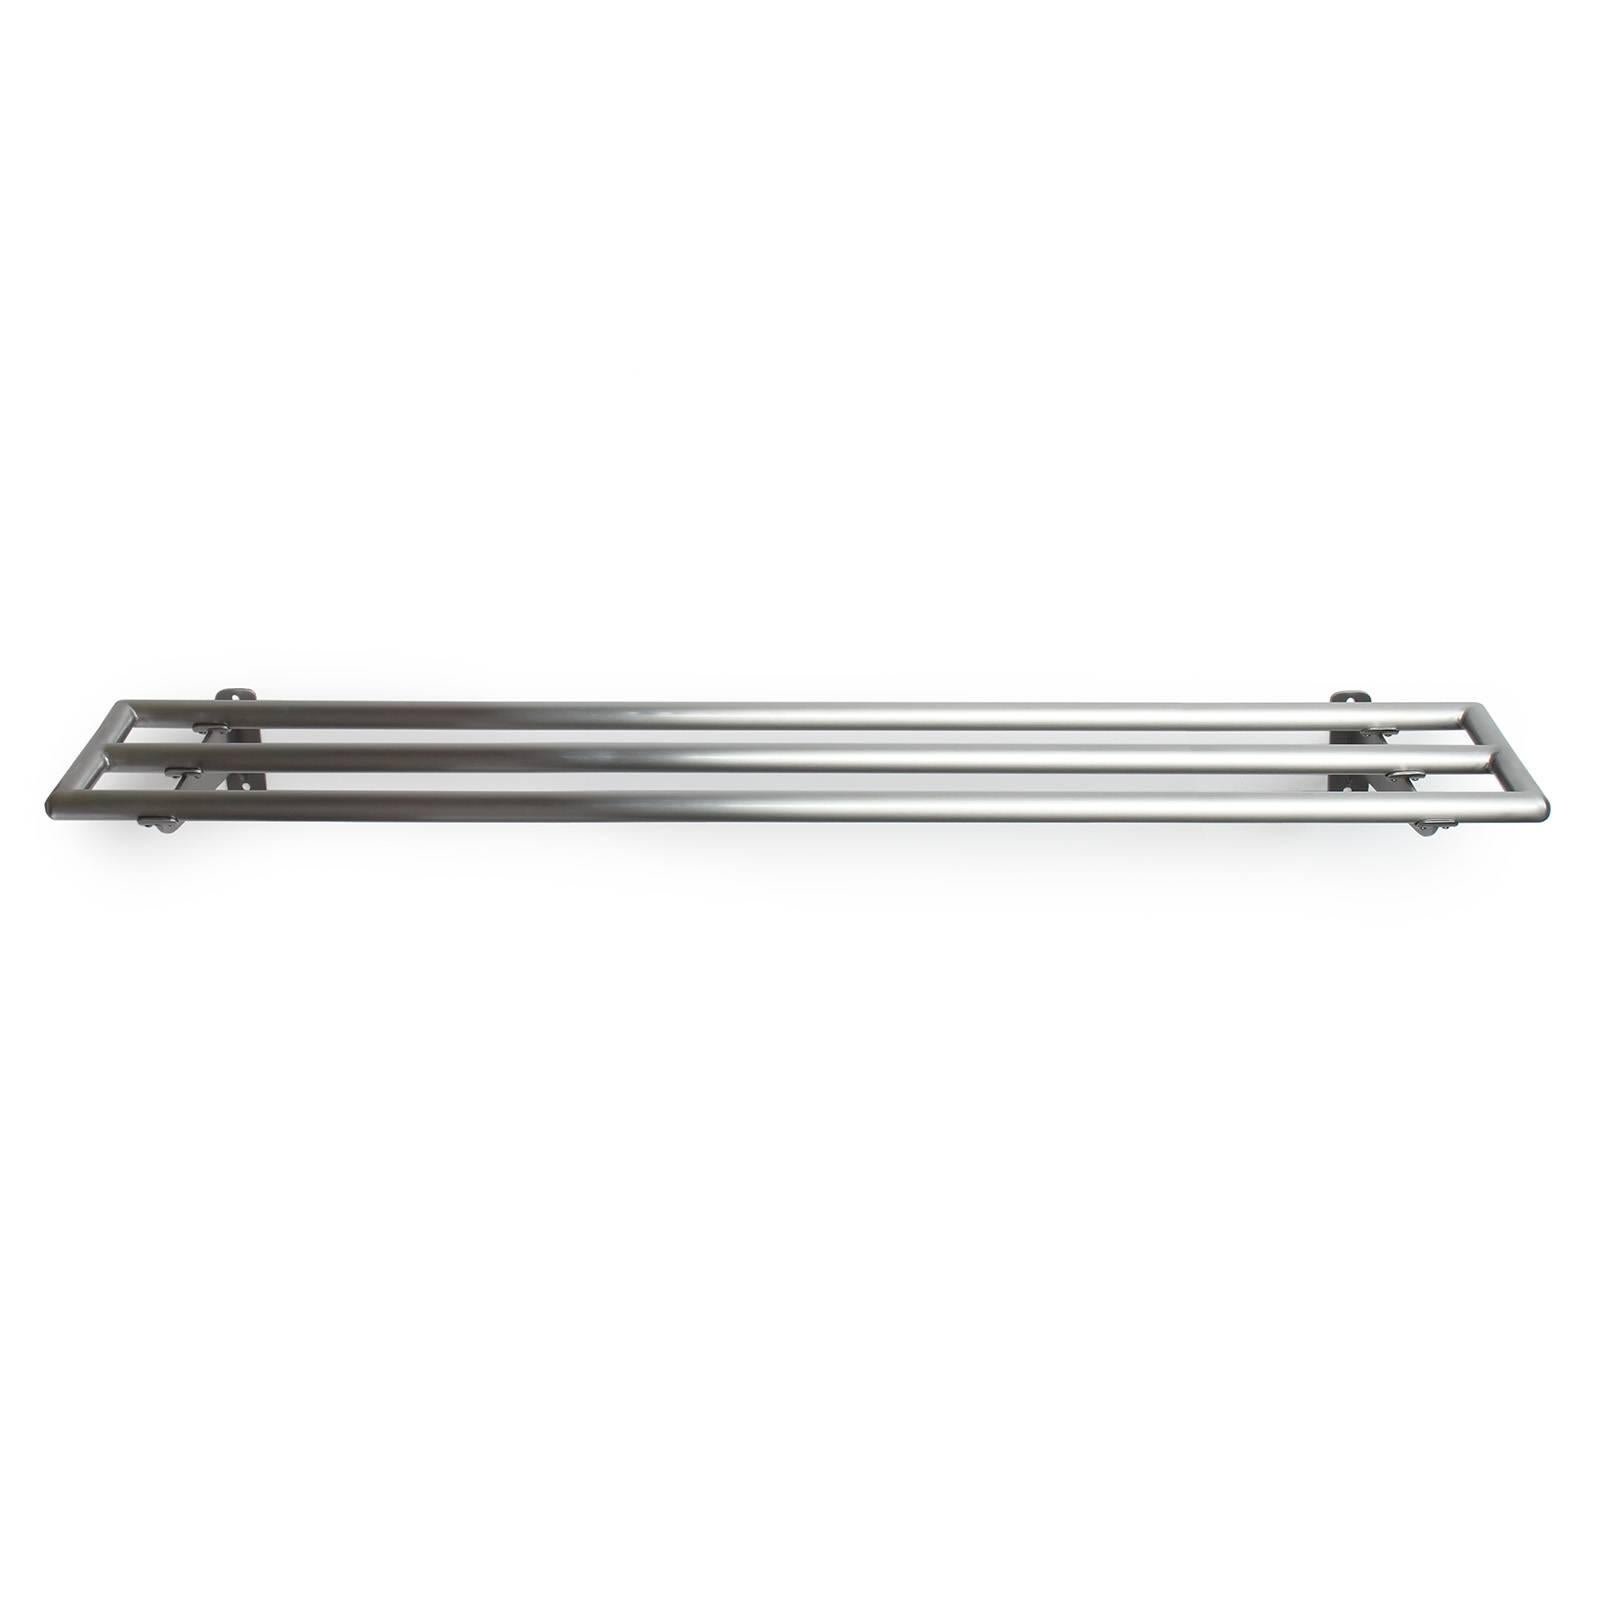 A Mid-Century Modern wall-mounted luggage rack / shelf in brushed stainless steel. Manufactured in the USA, circa 1950s.